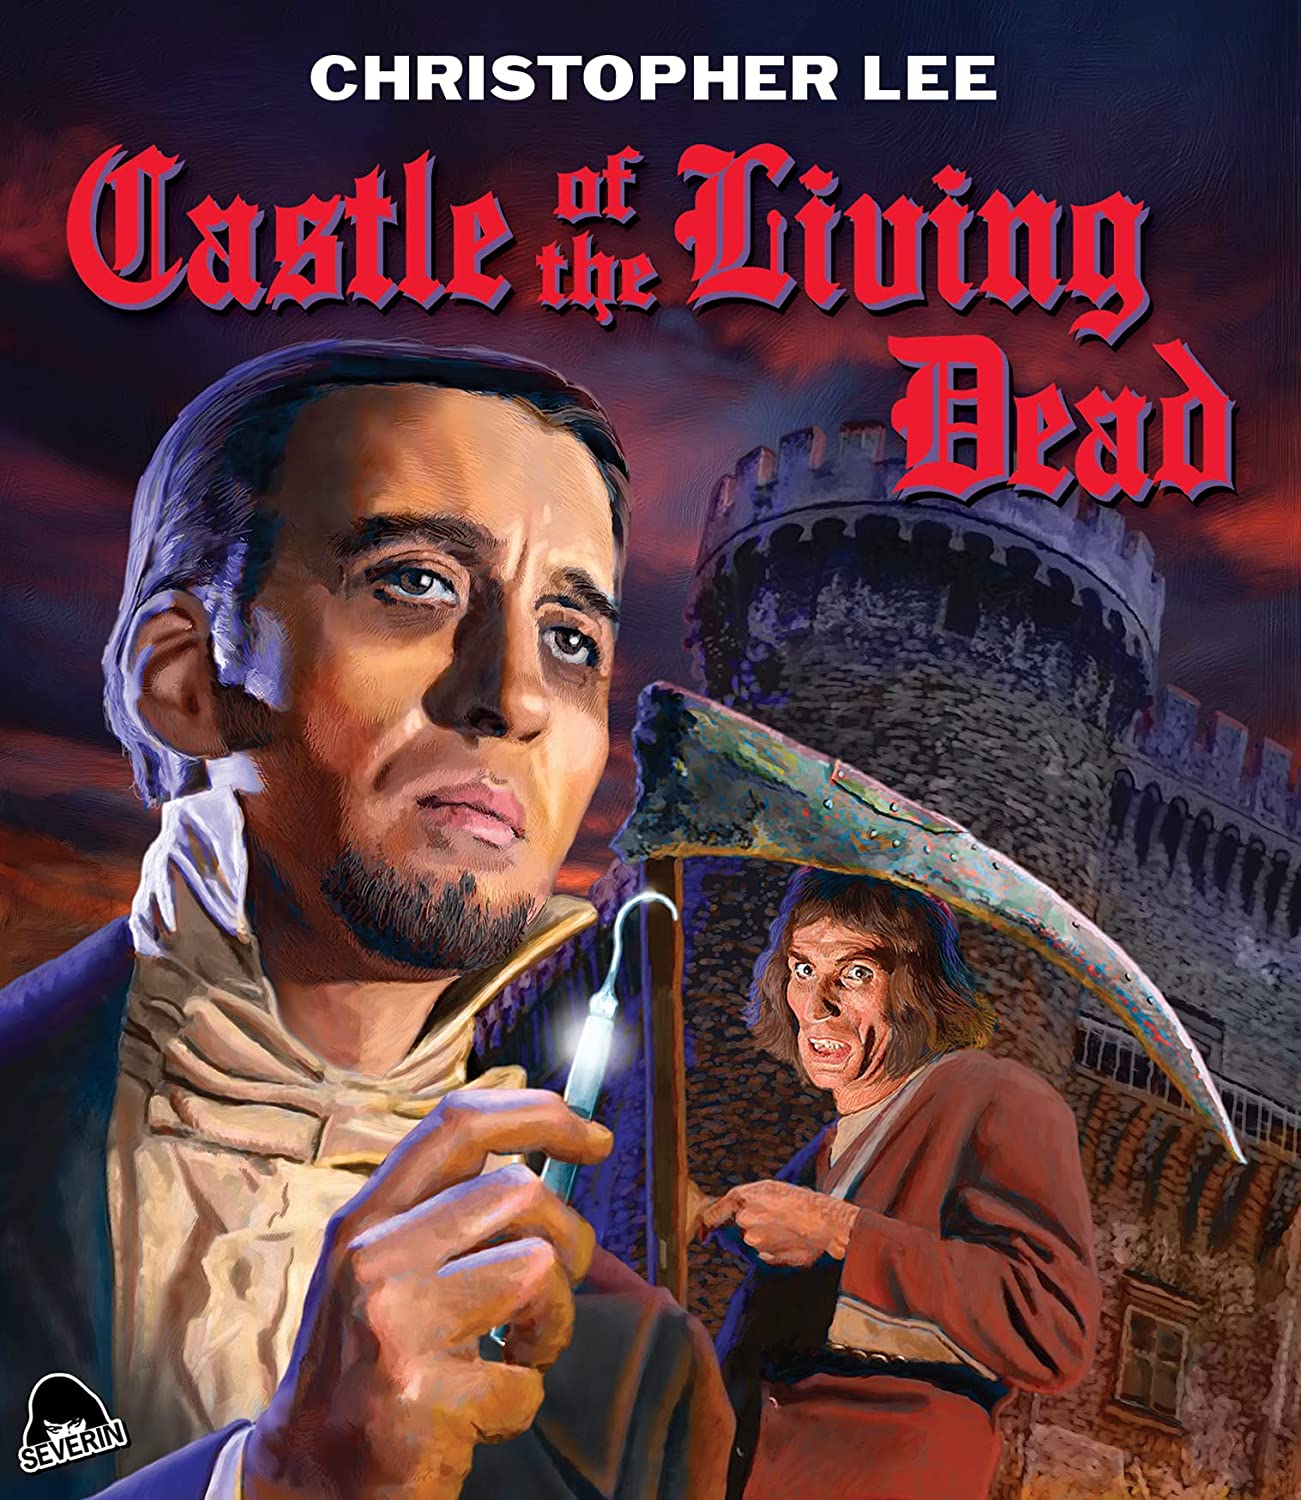 Castle Of The Living Dead [BluRay]